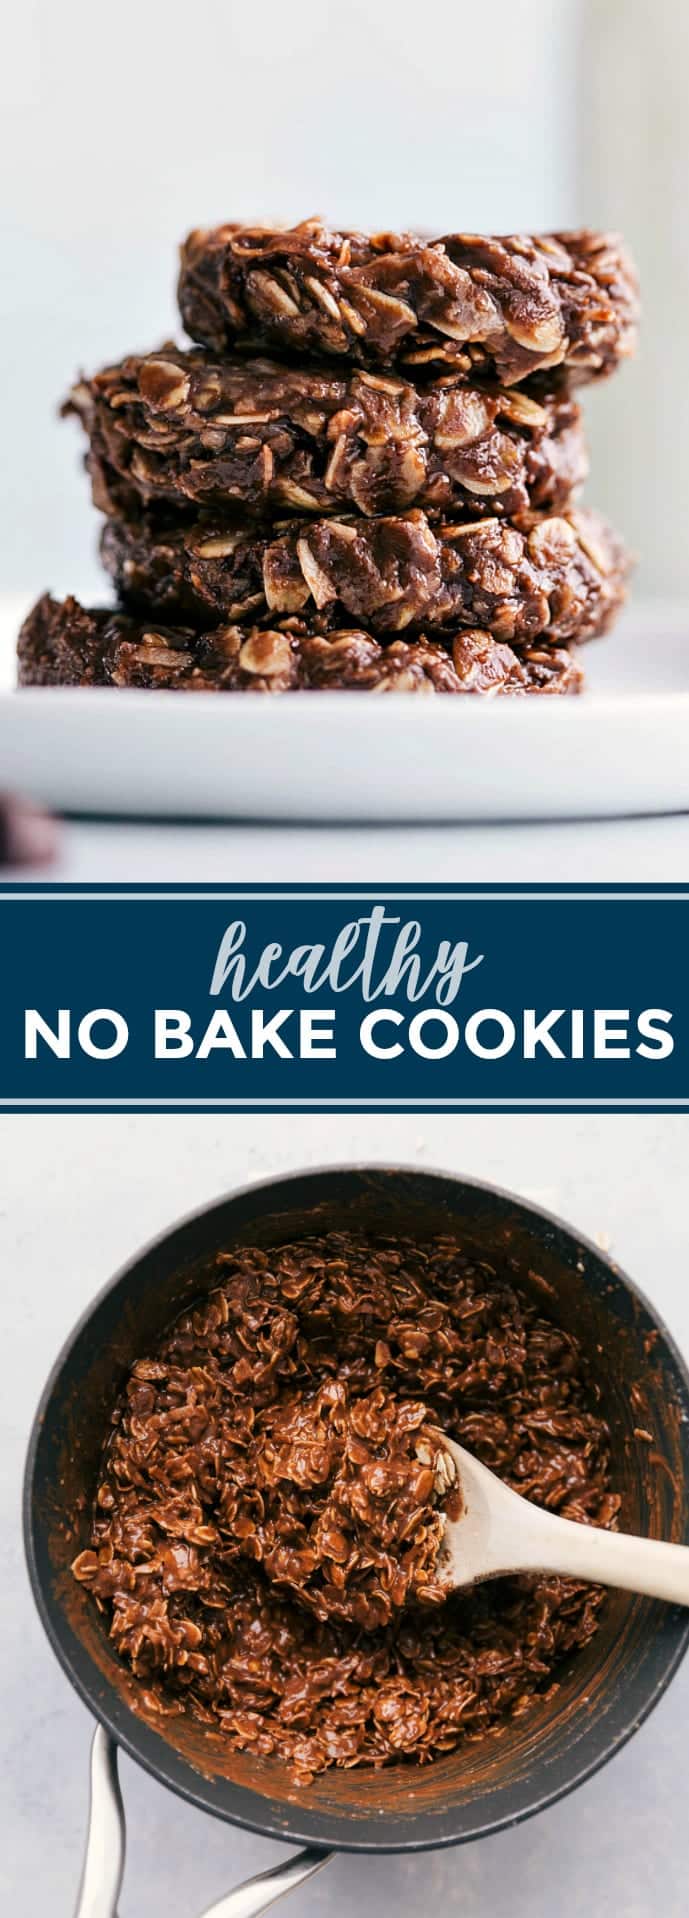 The famous chocolate peanut butter healthy no bake cookies made with better-for-you ingredients. These easy healthy no bake cookies can be made in 15 minutes or less and are truly the best! via chelseasmessyapron.com #healthy #no #bake #cookies #easy #quick #oatmeal #oat #dessert #treat